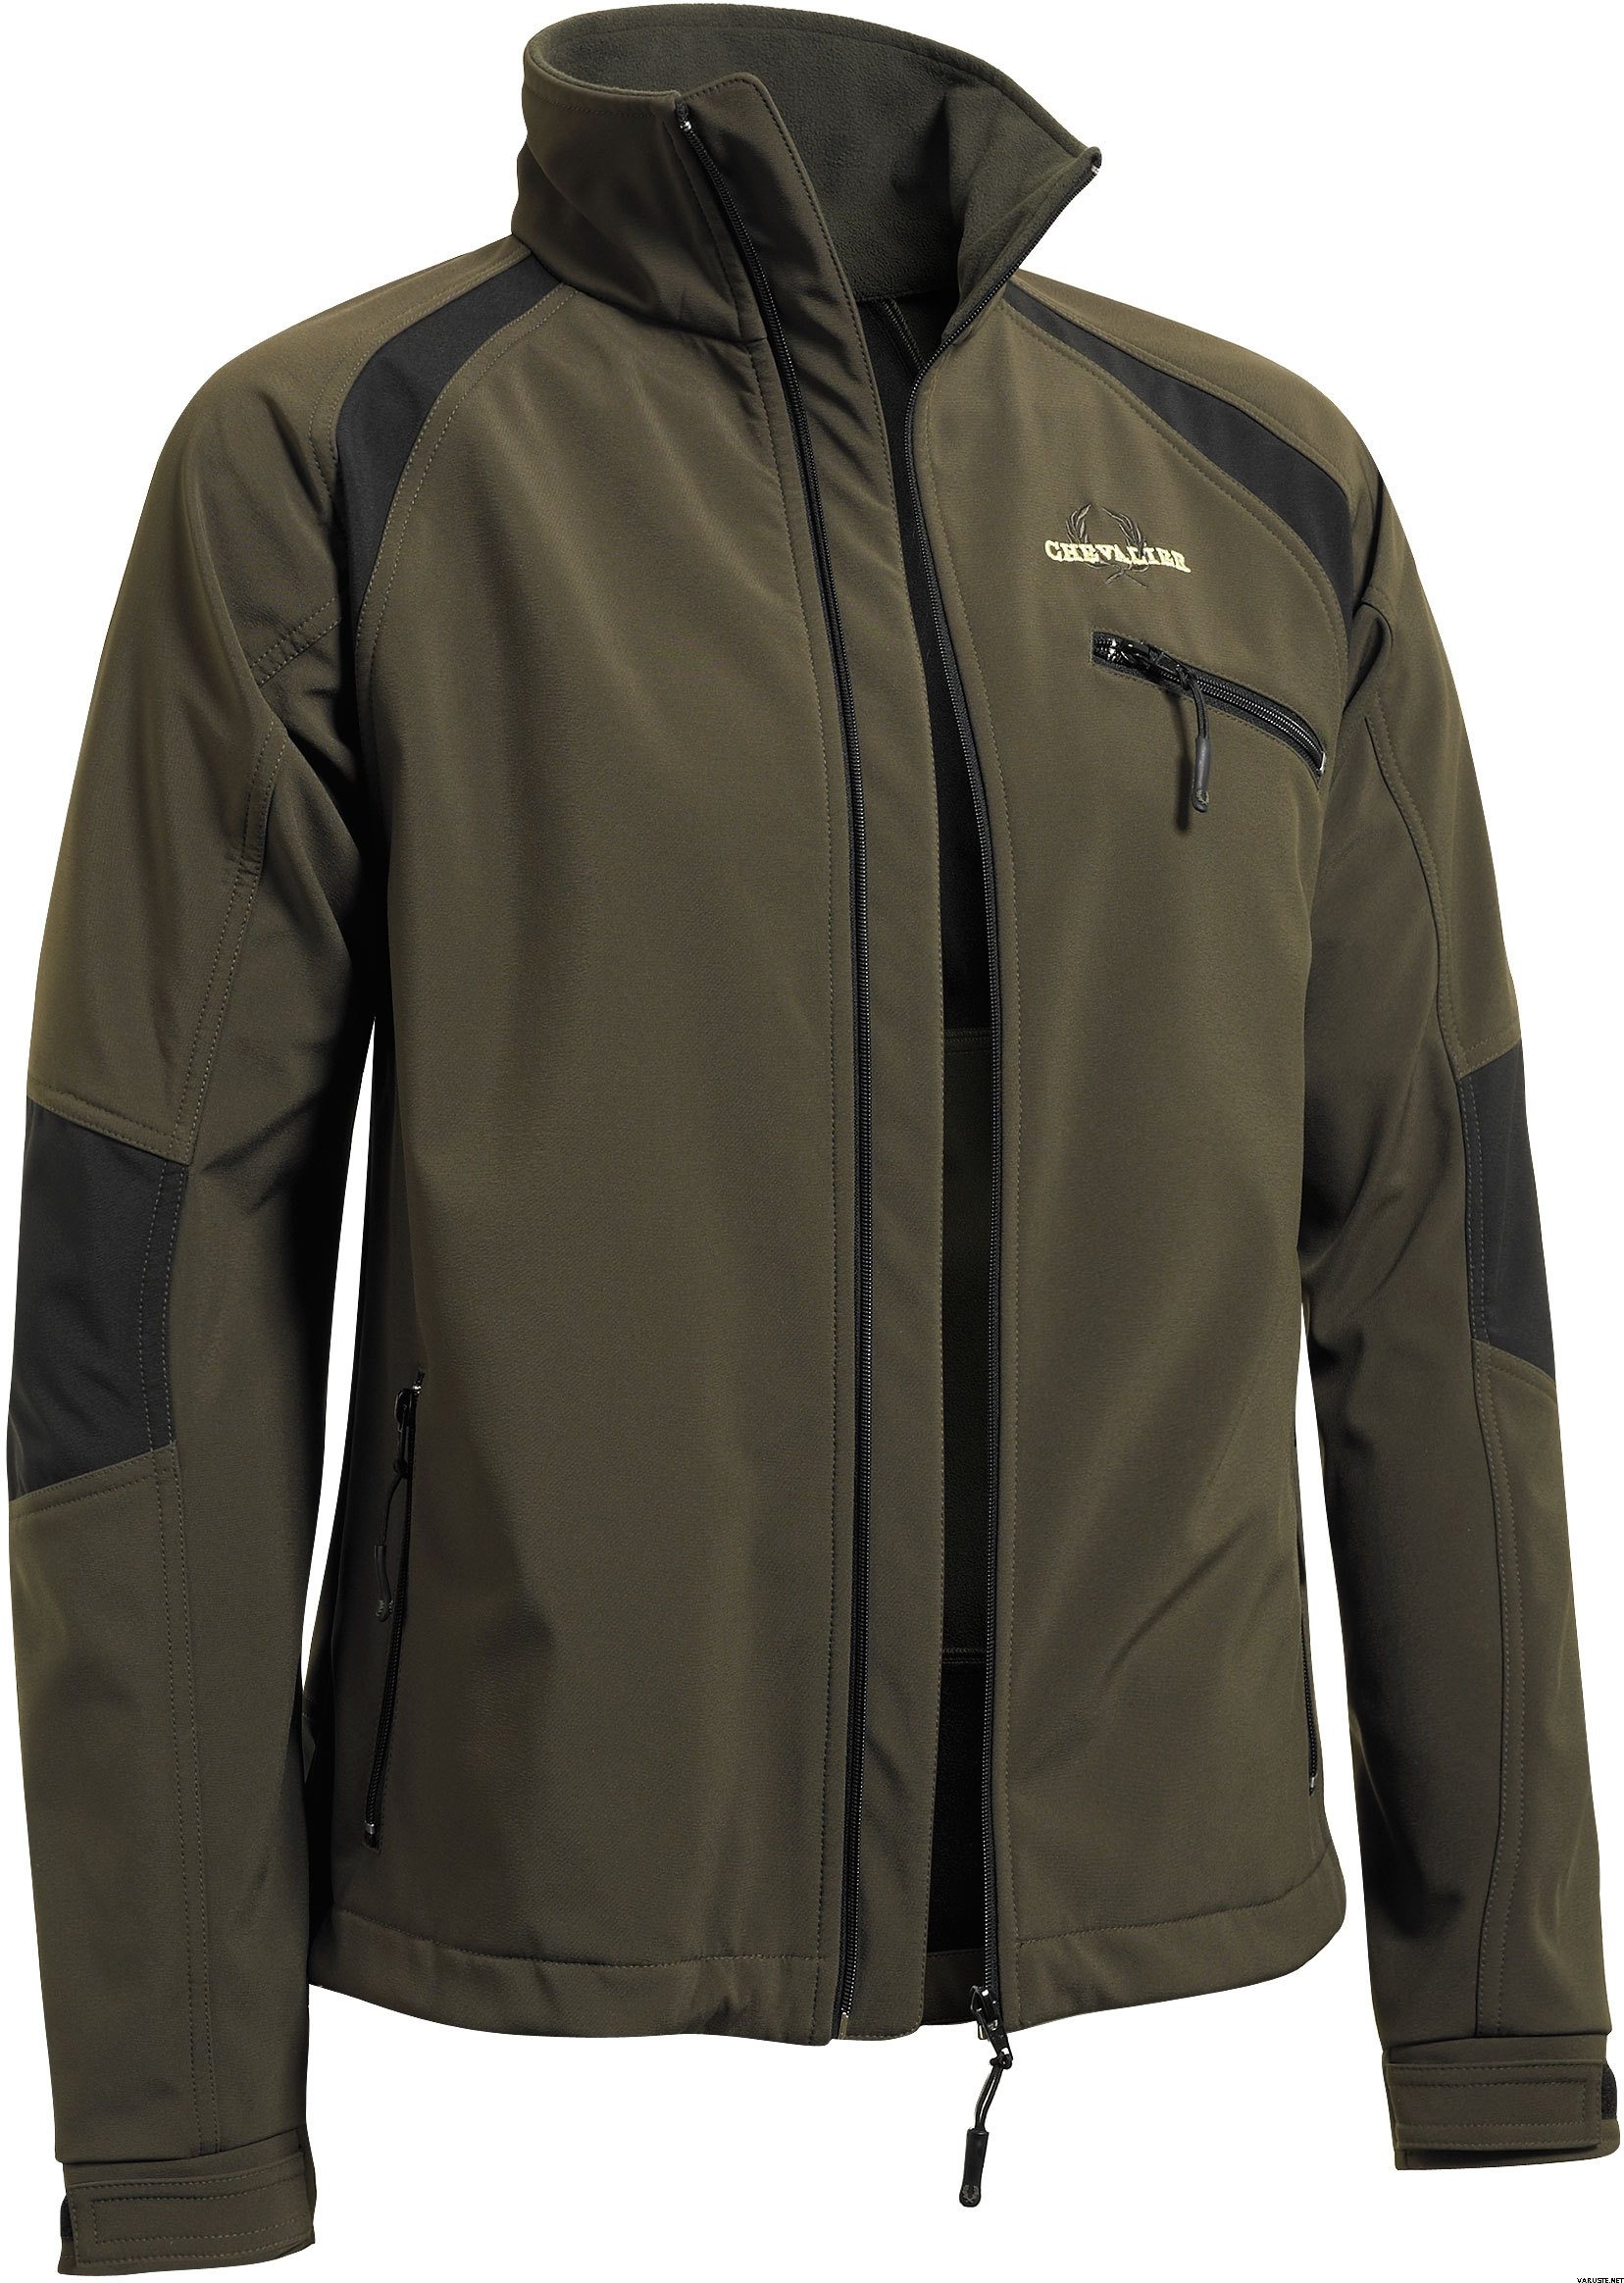 Chevalier Calibre Soft Shell Jacket | Men's Hunting Jackets without ...